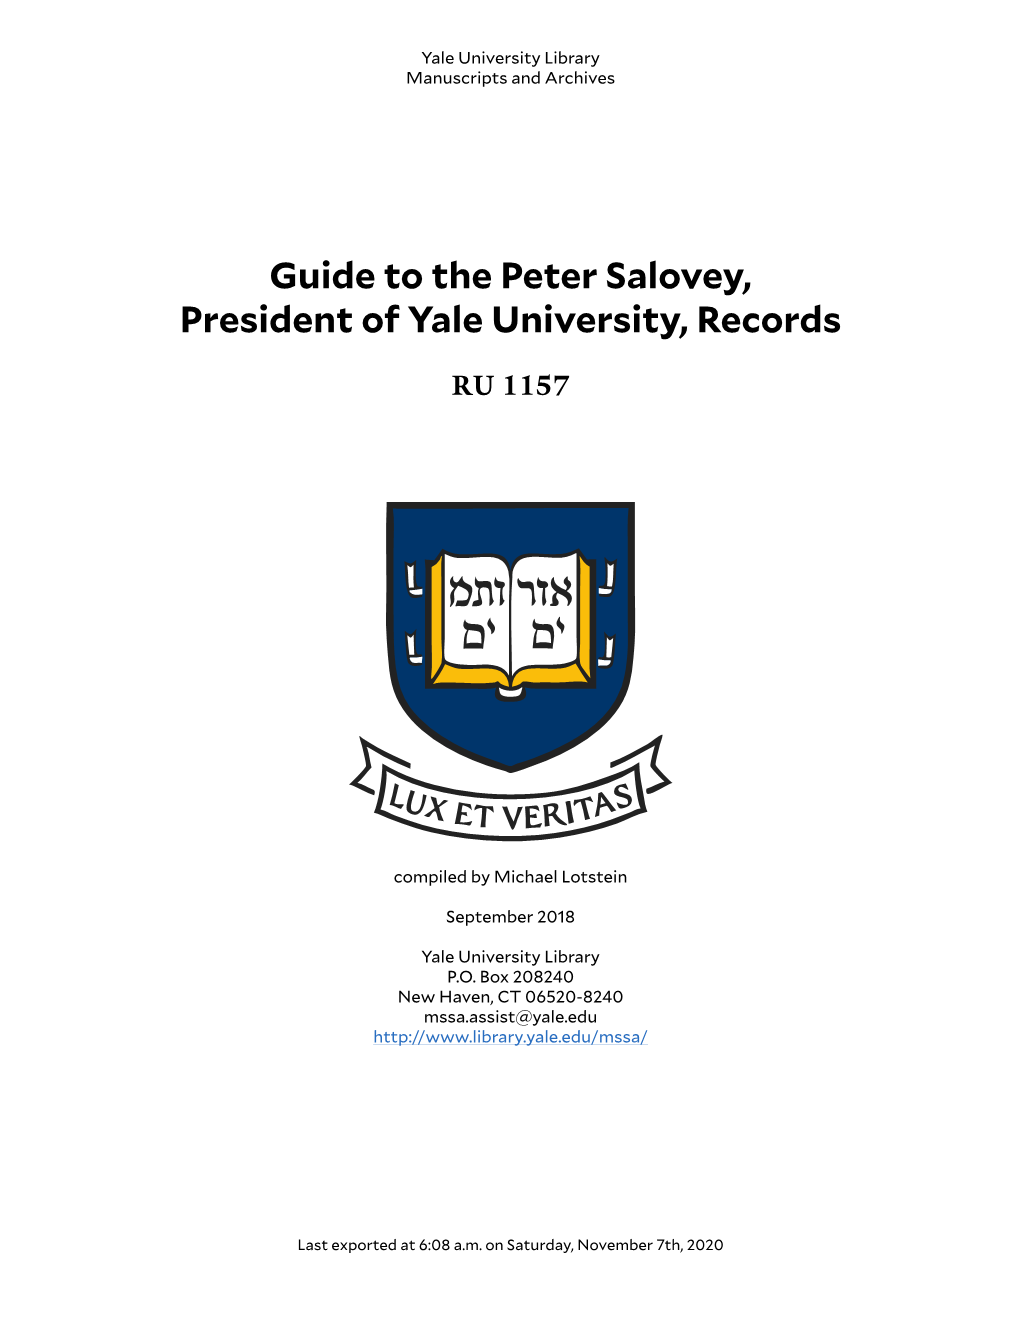 Guide to the Peter Salovey, President of Yale University, Records